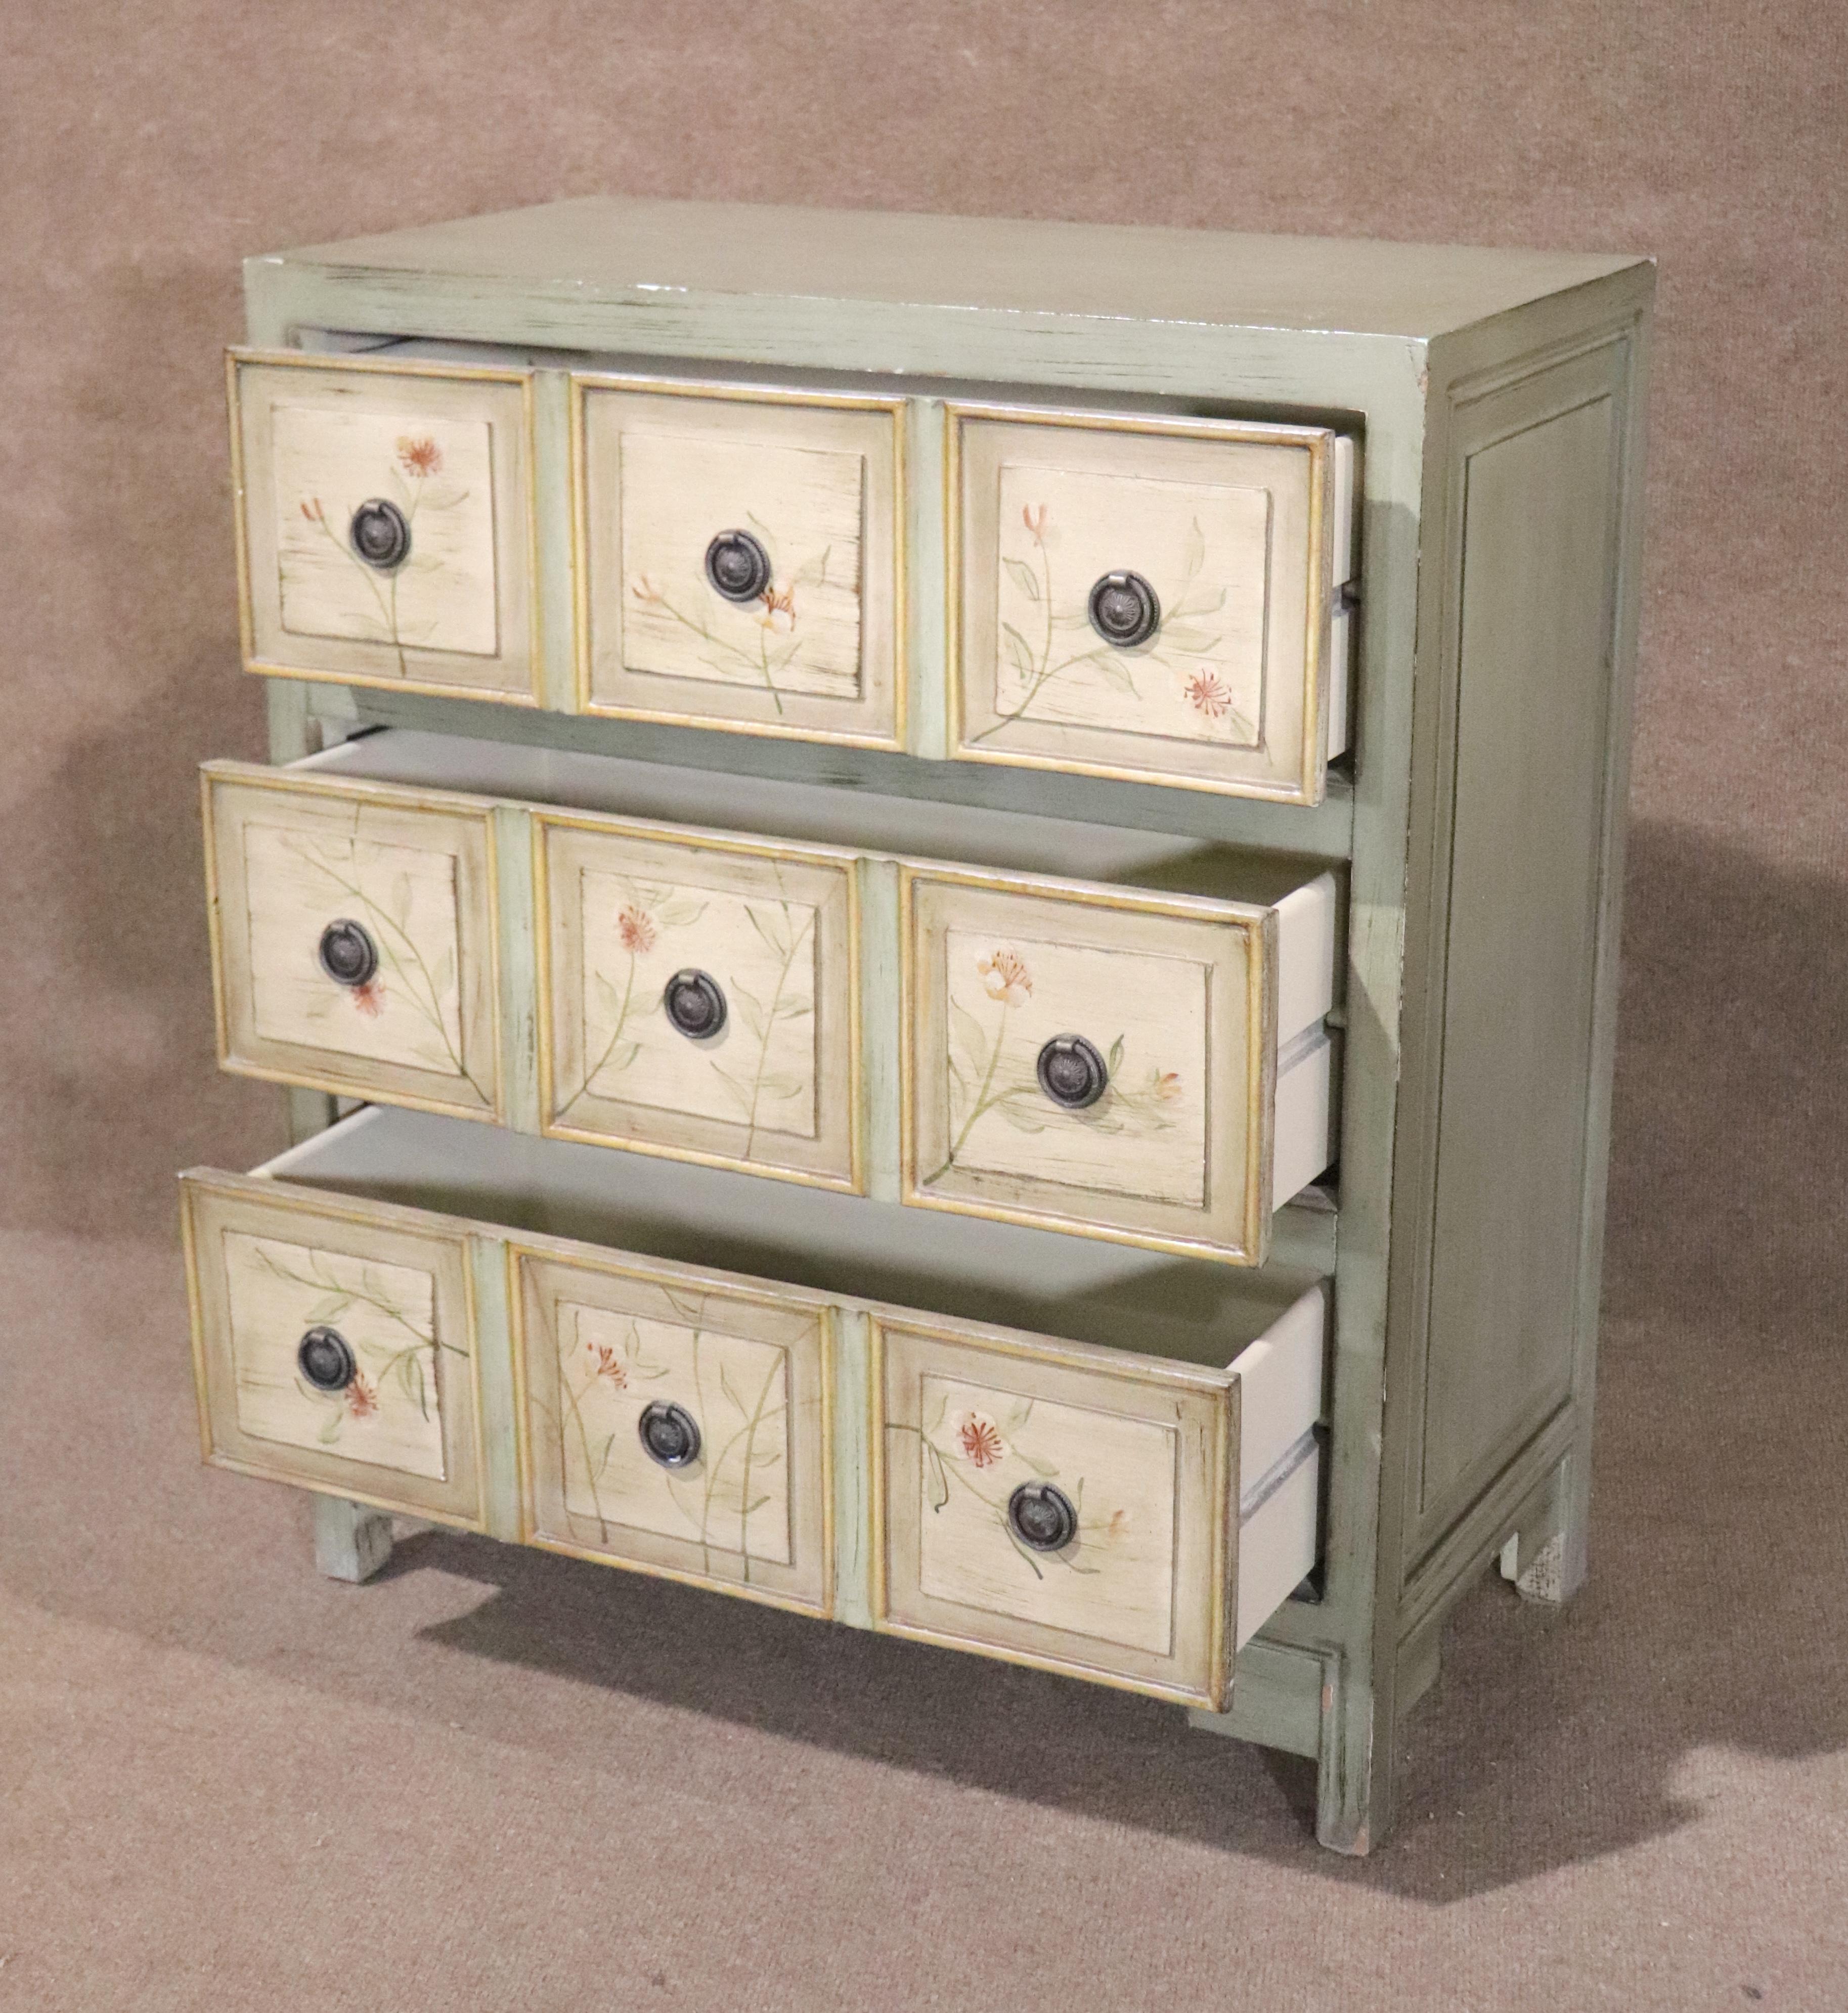 This farmhouse style chest of drawers is painted with floral embellishments. Three wide drawers with metal hardware. Nice faded paint design.
Please confirm location NY or NJ